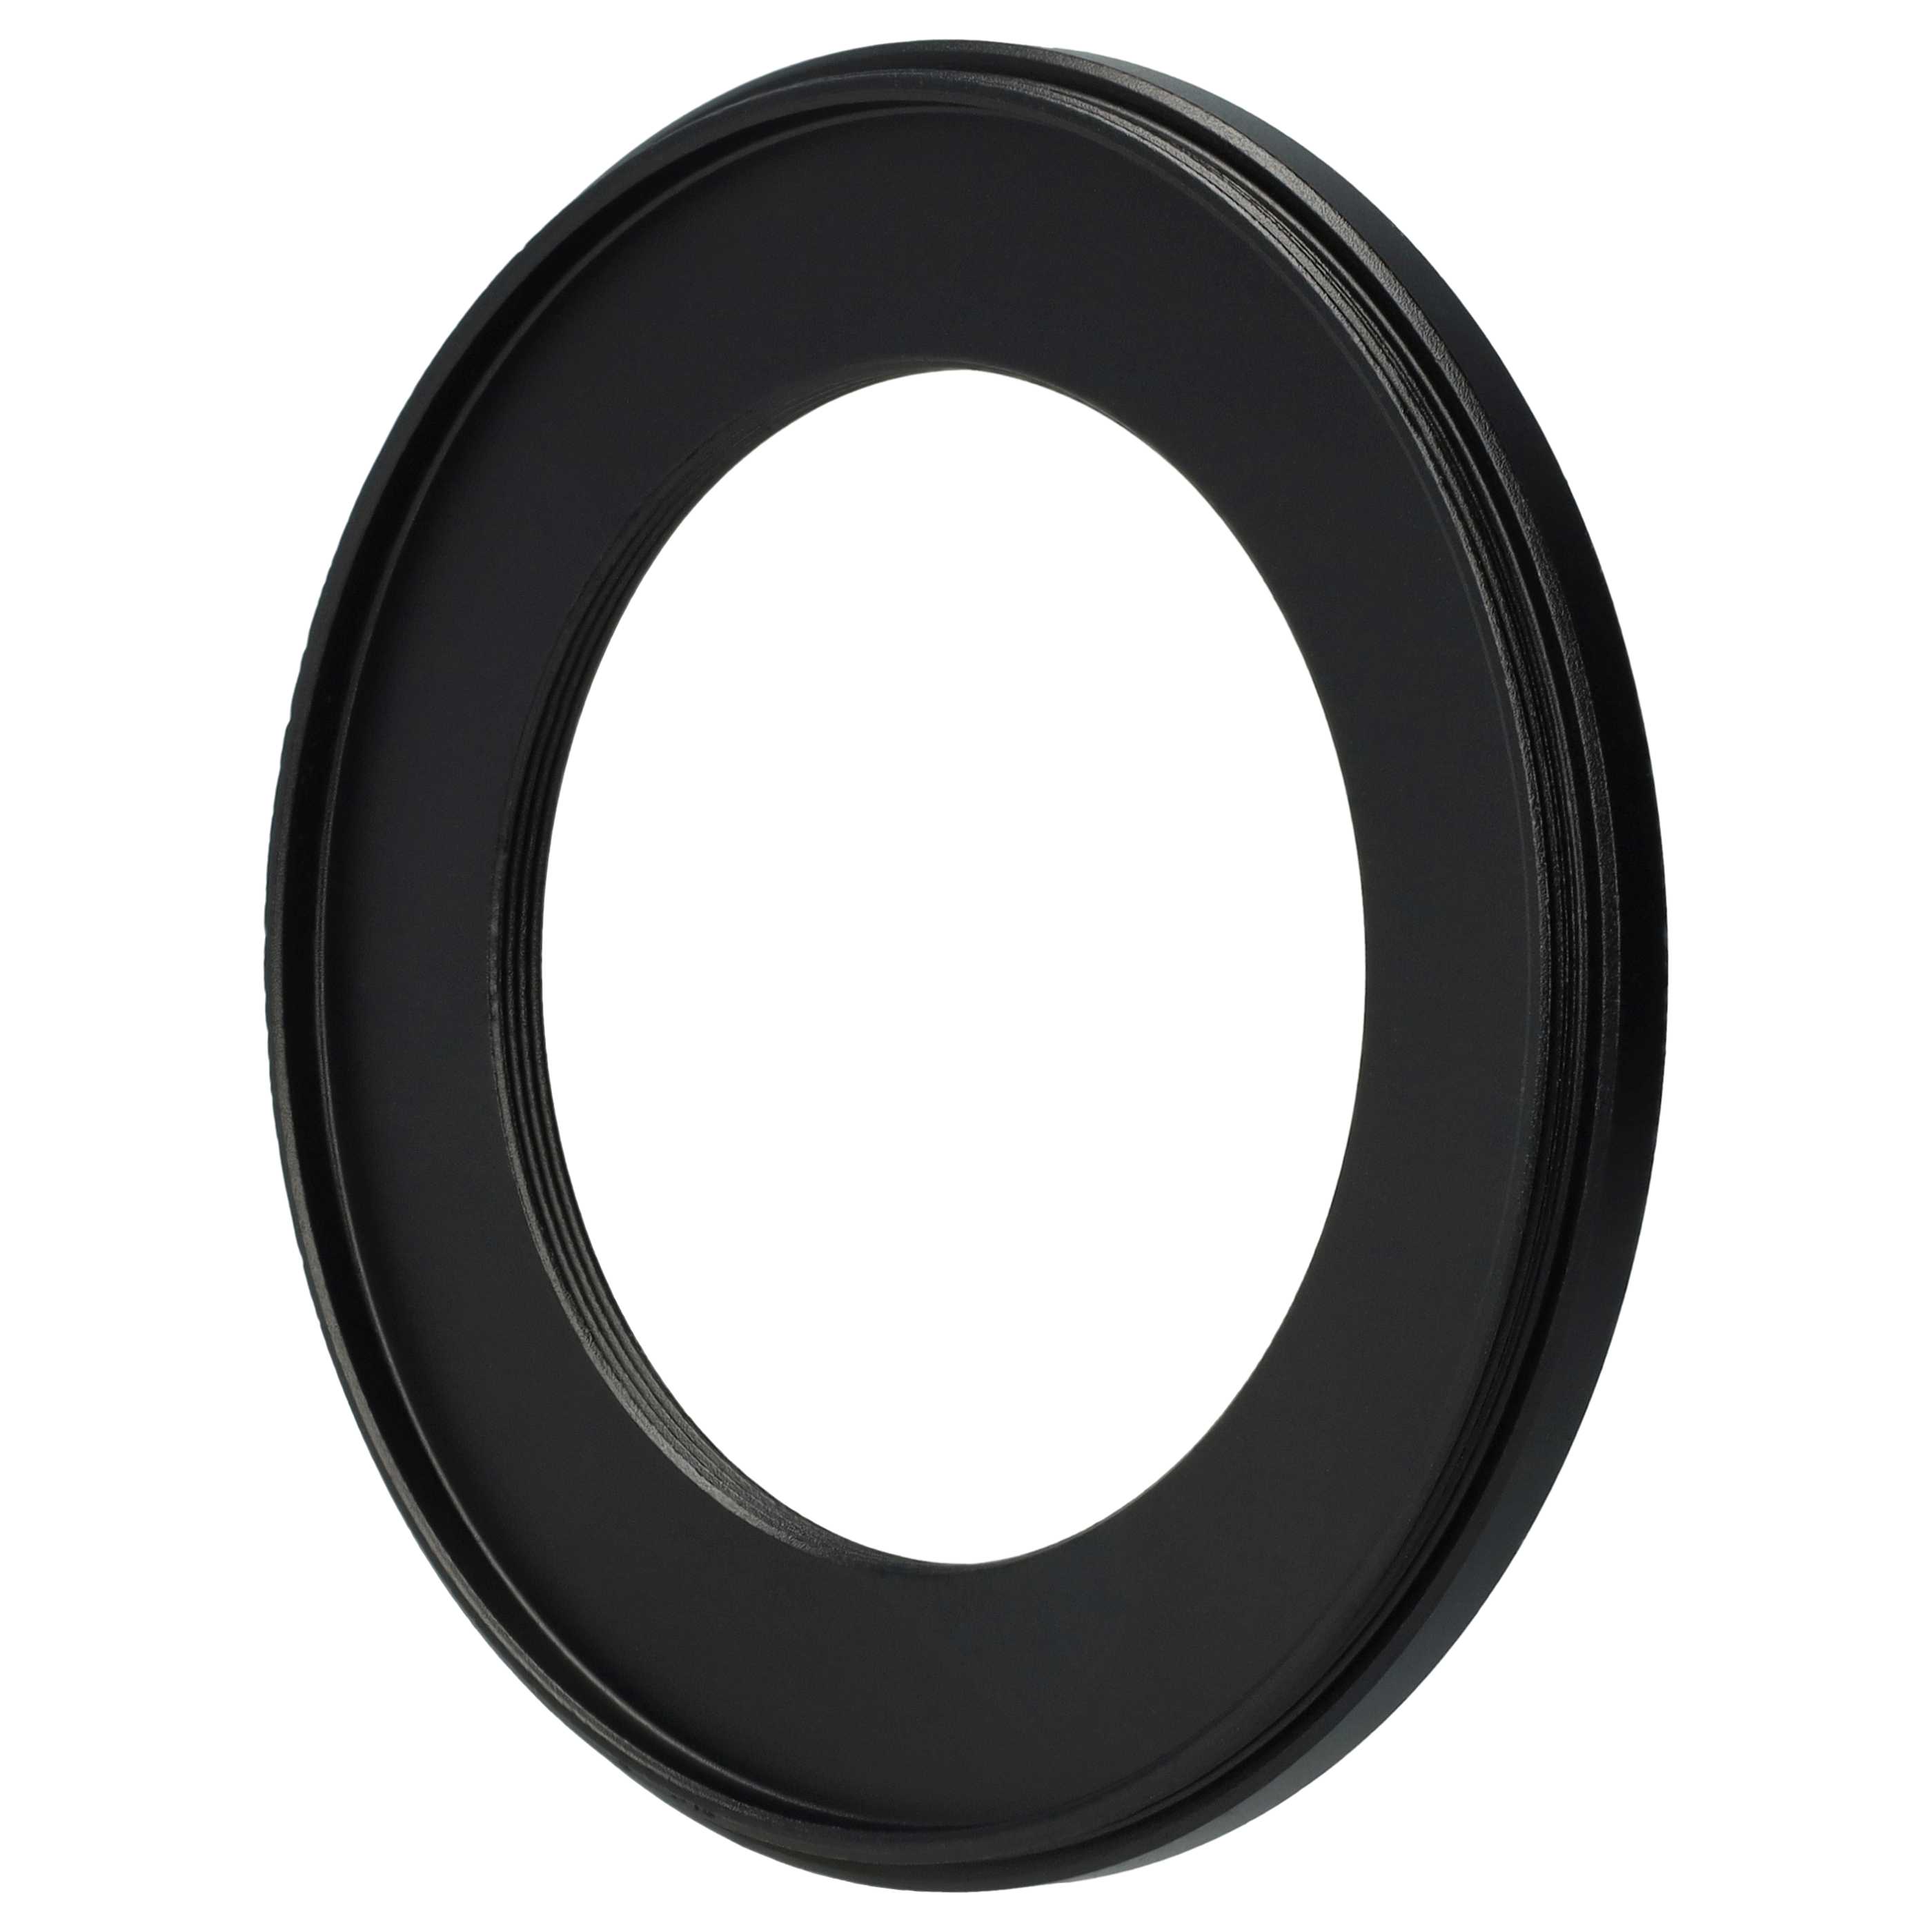 Step-Down Ring Adapter from 77 mm to 52 mm suitable for Camera Lens - Filter Adapter, metal